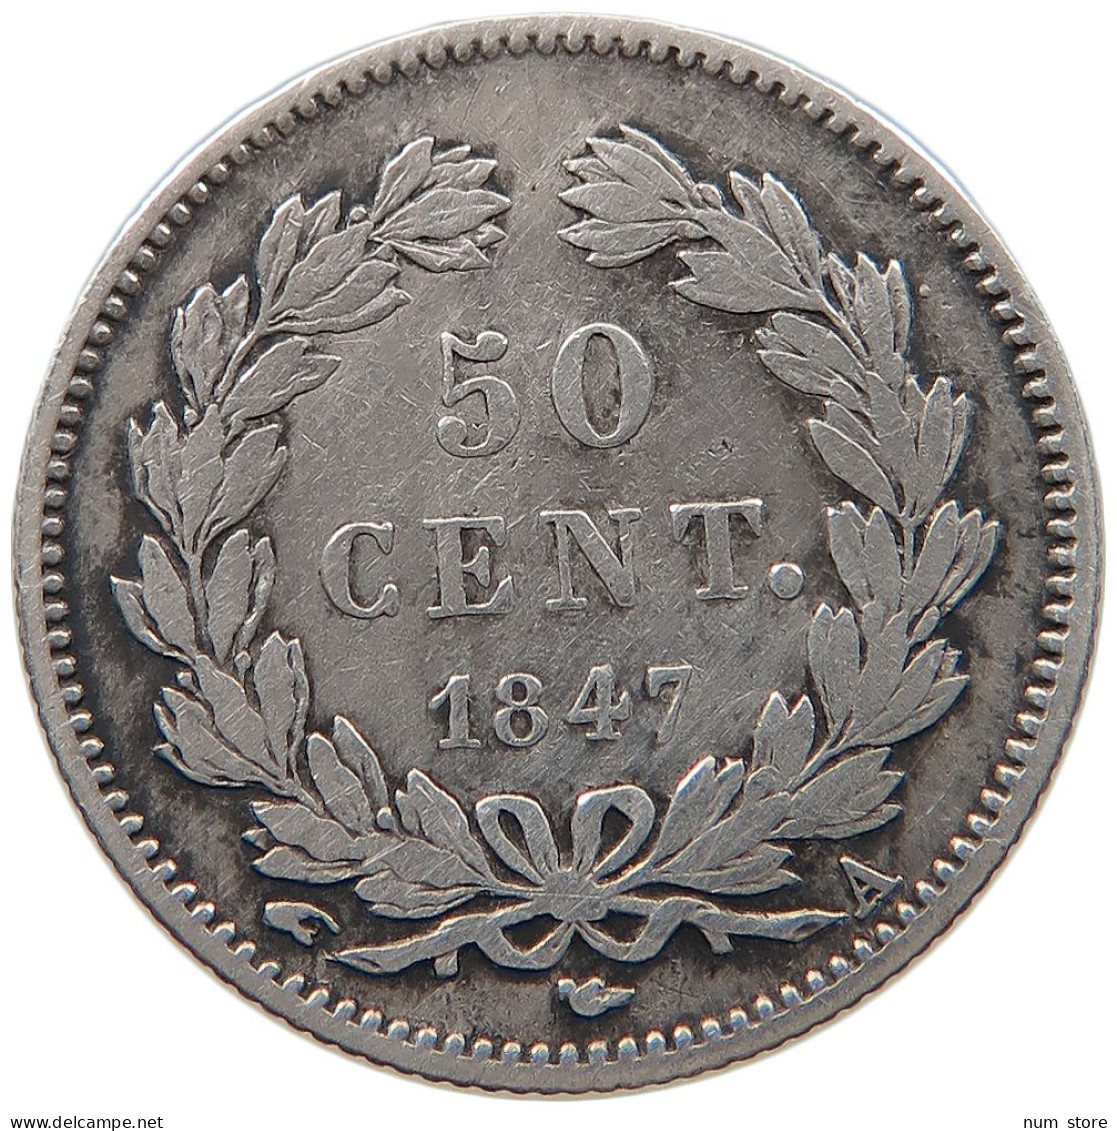 FRANCE 50 CENTIMES 1847 A LOUIS PHILIPPE I. (1830-1848) #t143 0611 - 50 Centimes